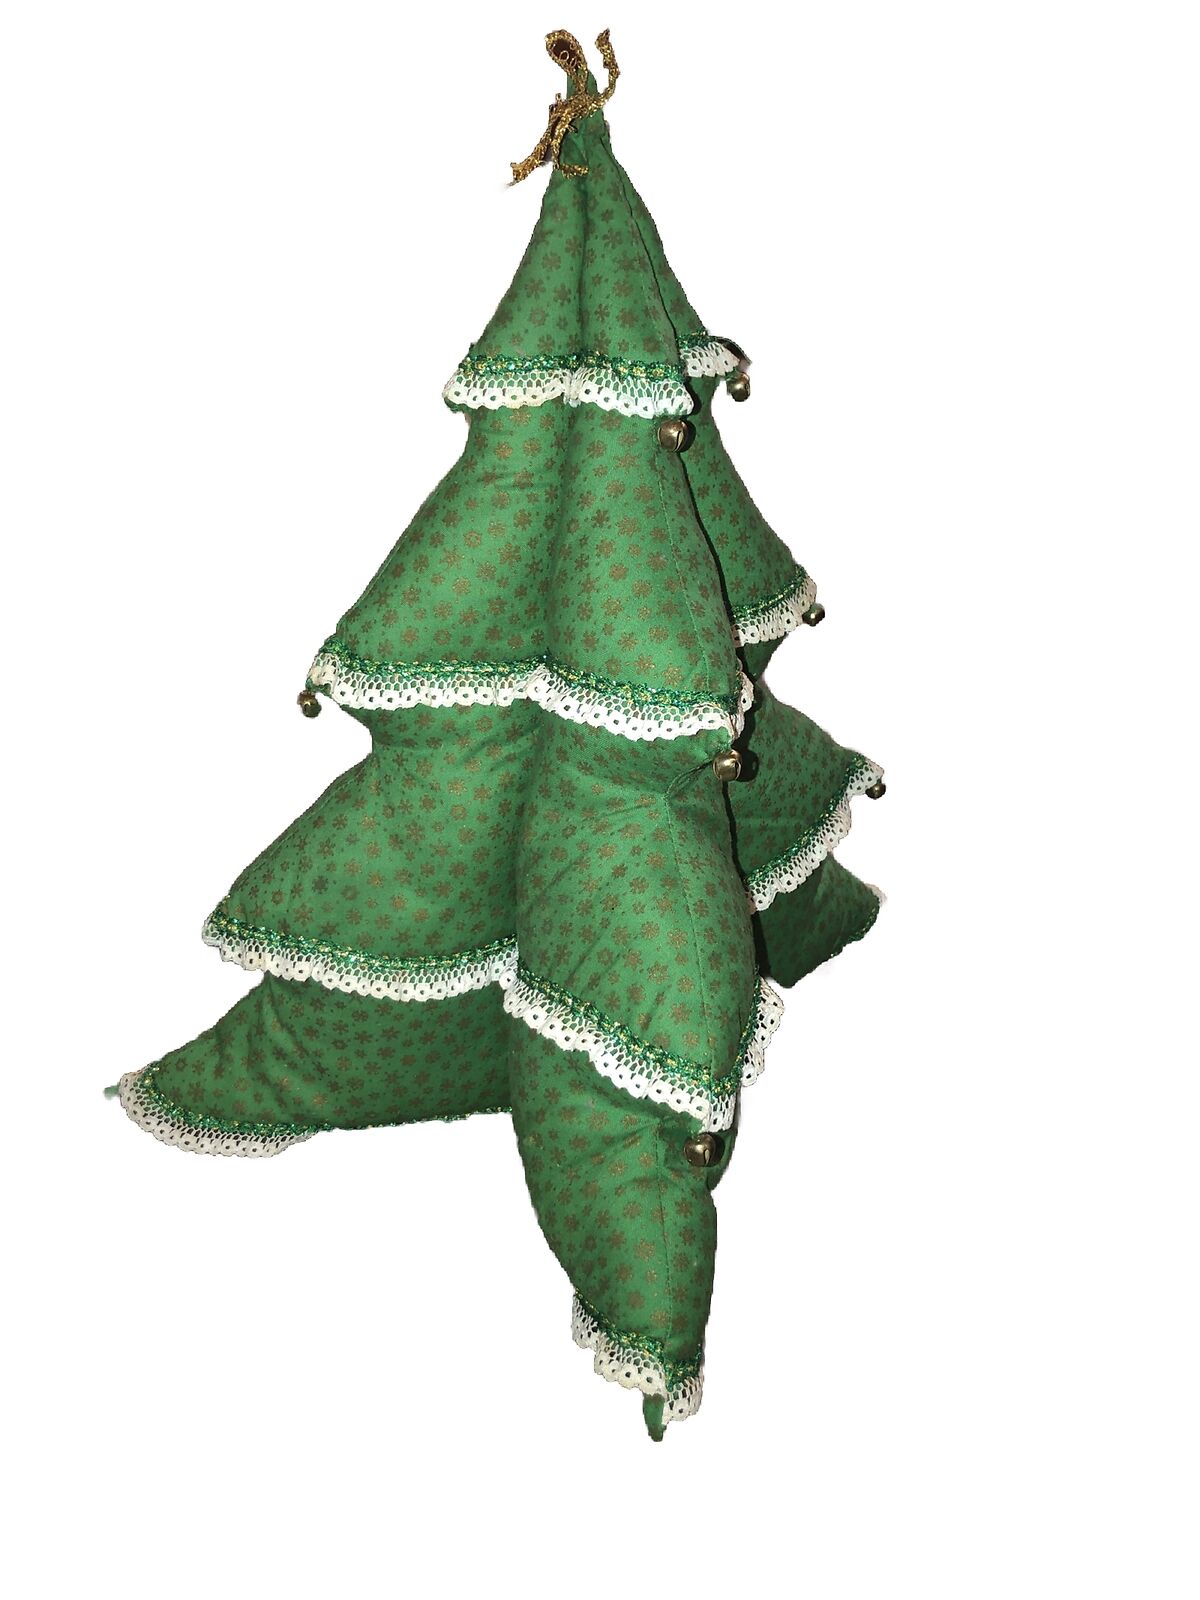 Fabric Christmas Tree Quilted 3D stuffed Handmade Green Table Decor vintage